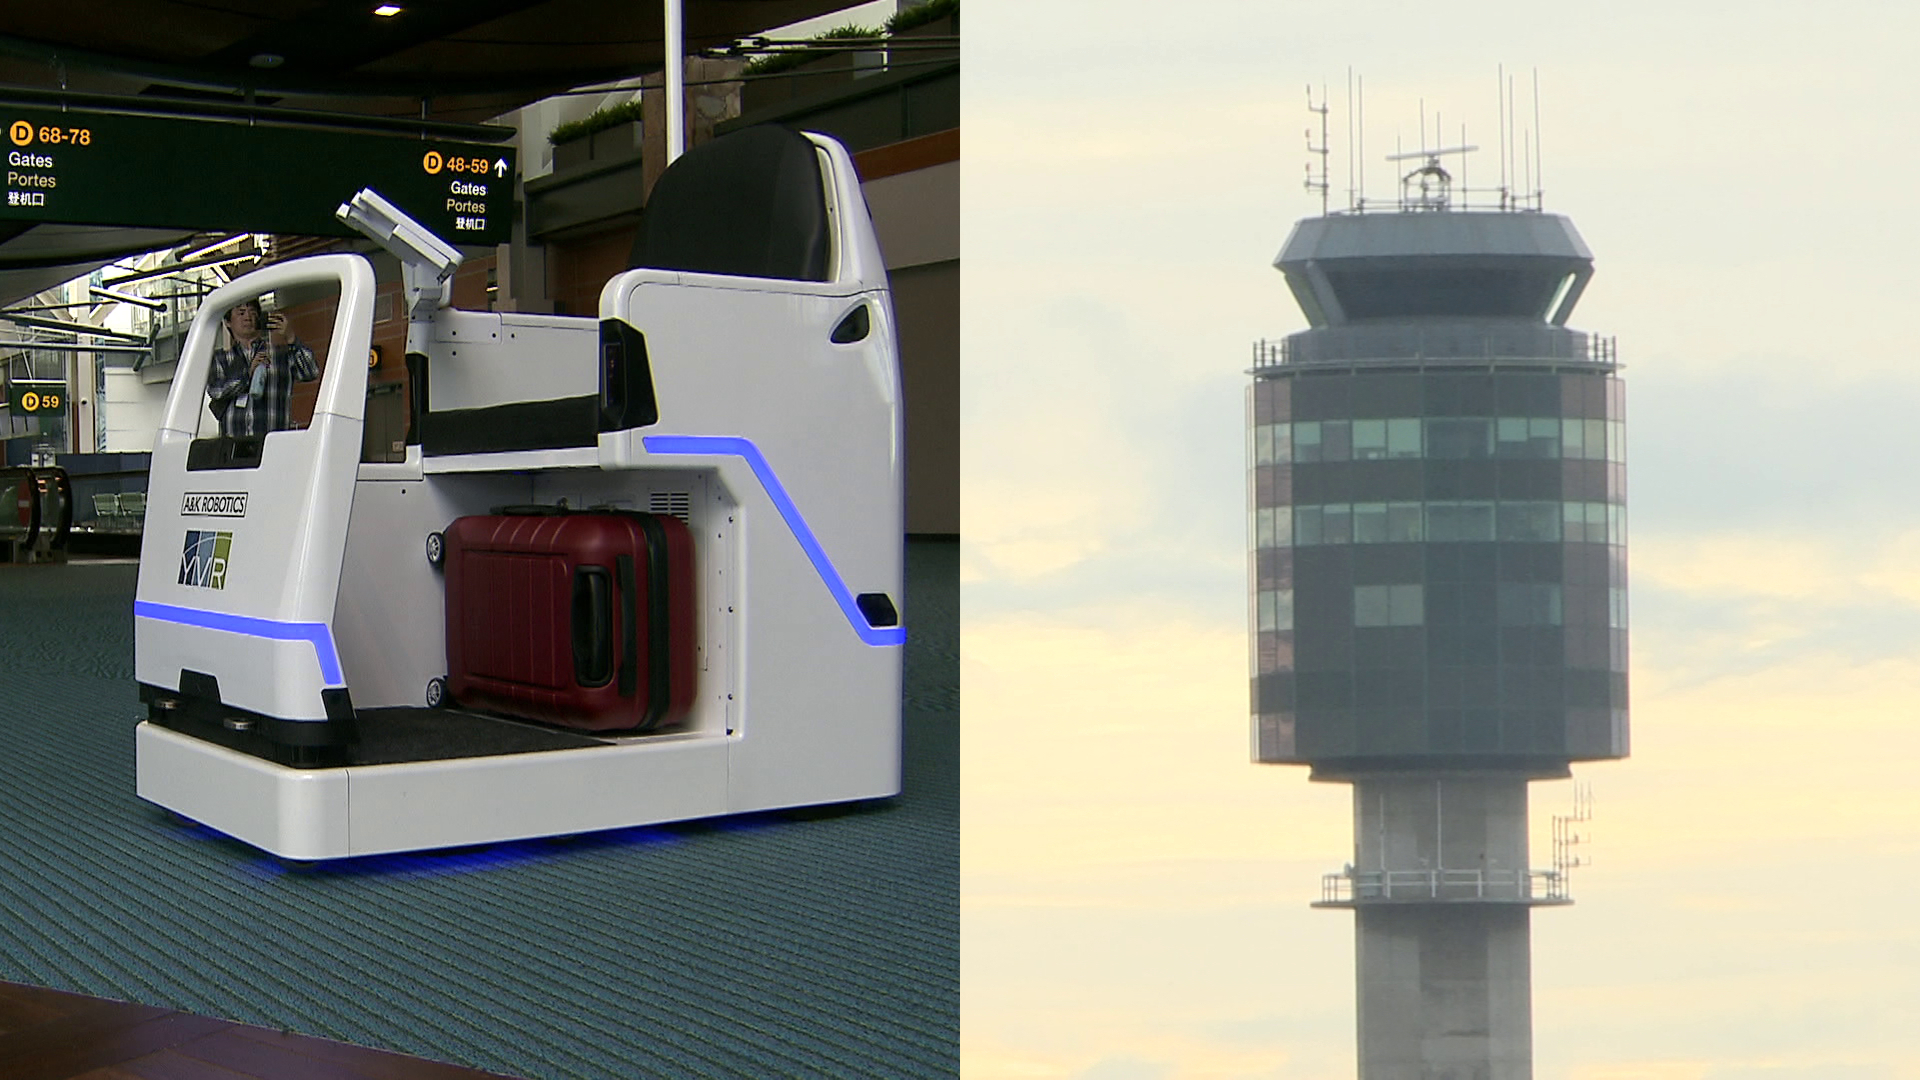 Vancouver airport launches mobility robots